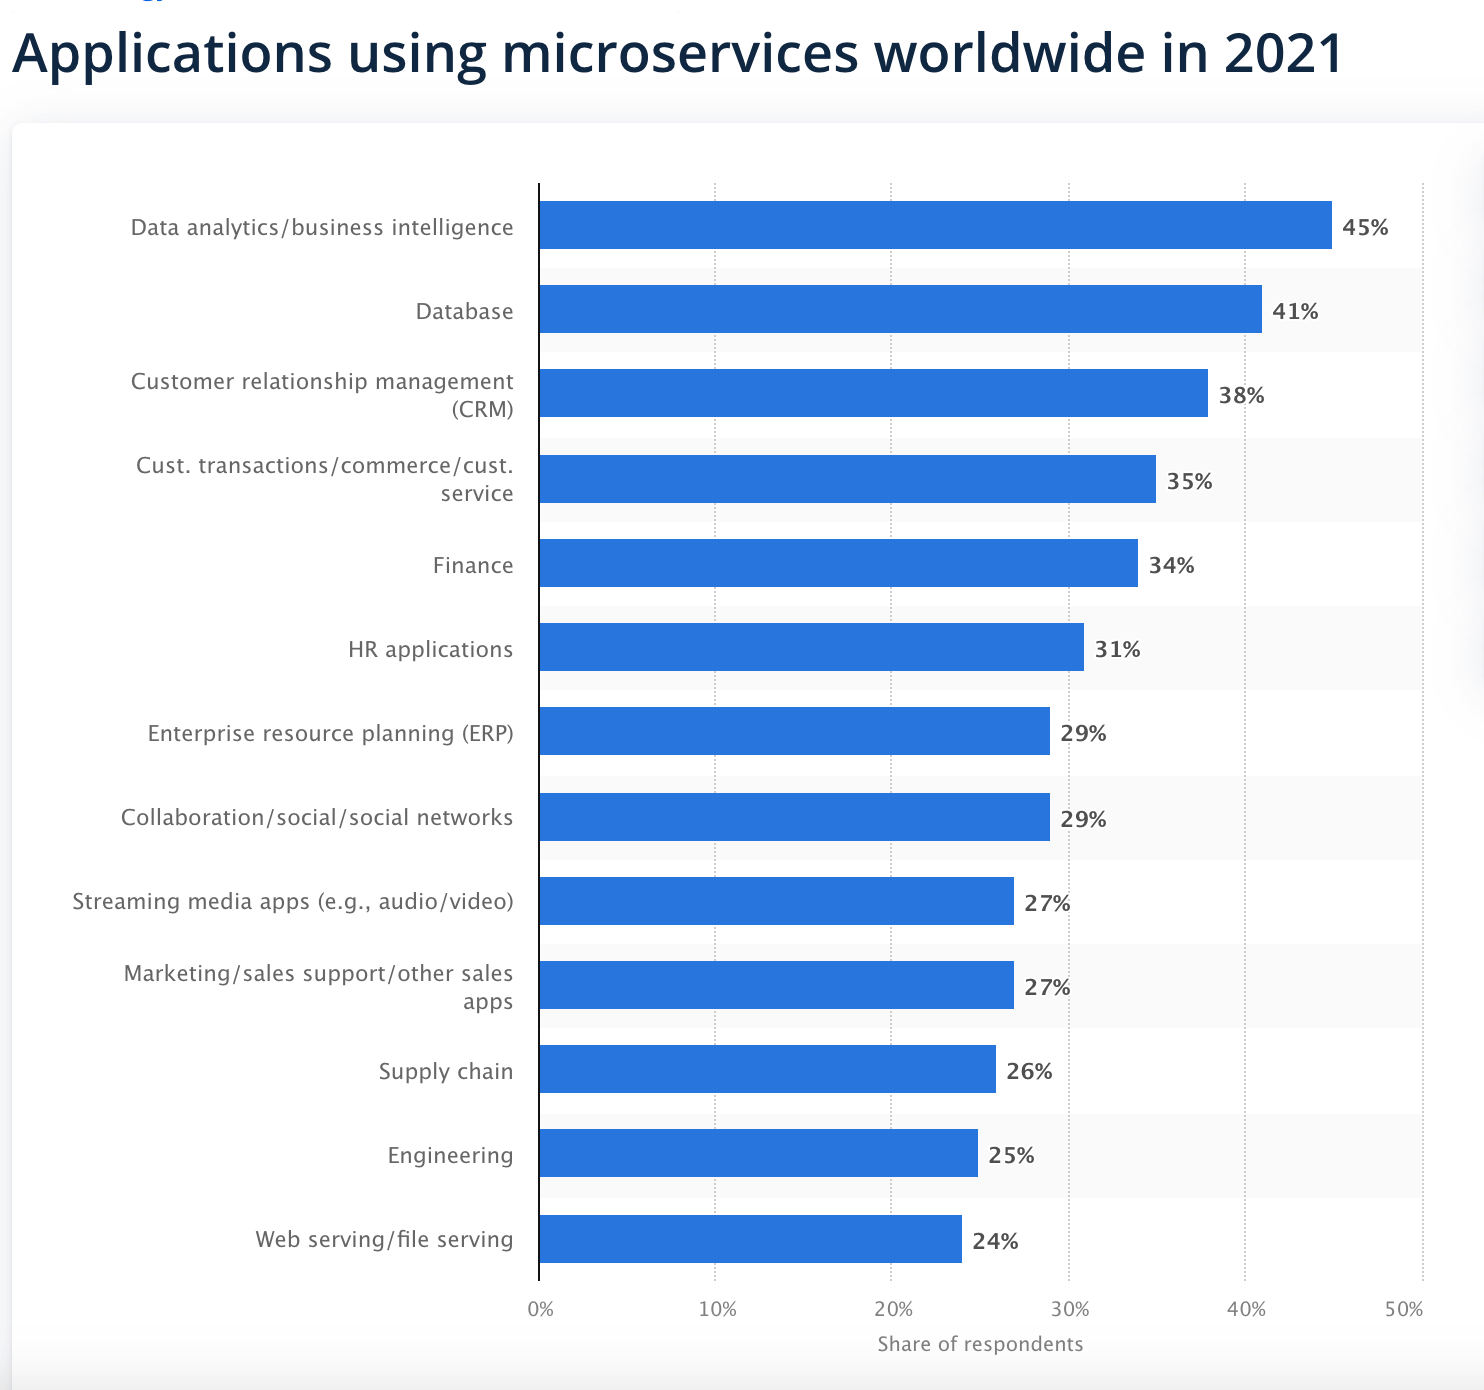 application using microservices worldwide in 2021